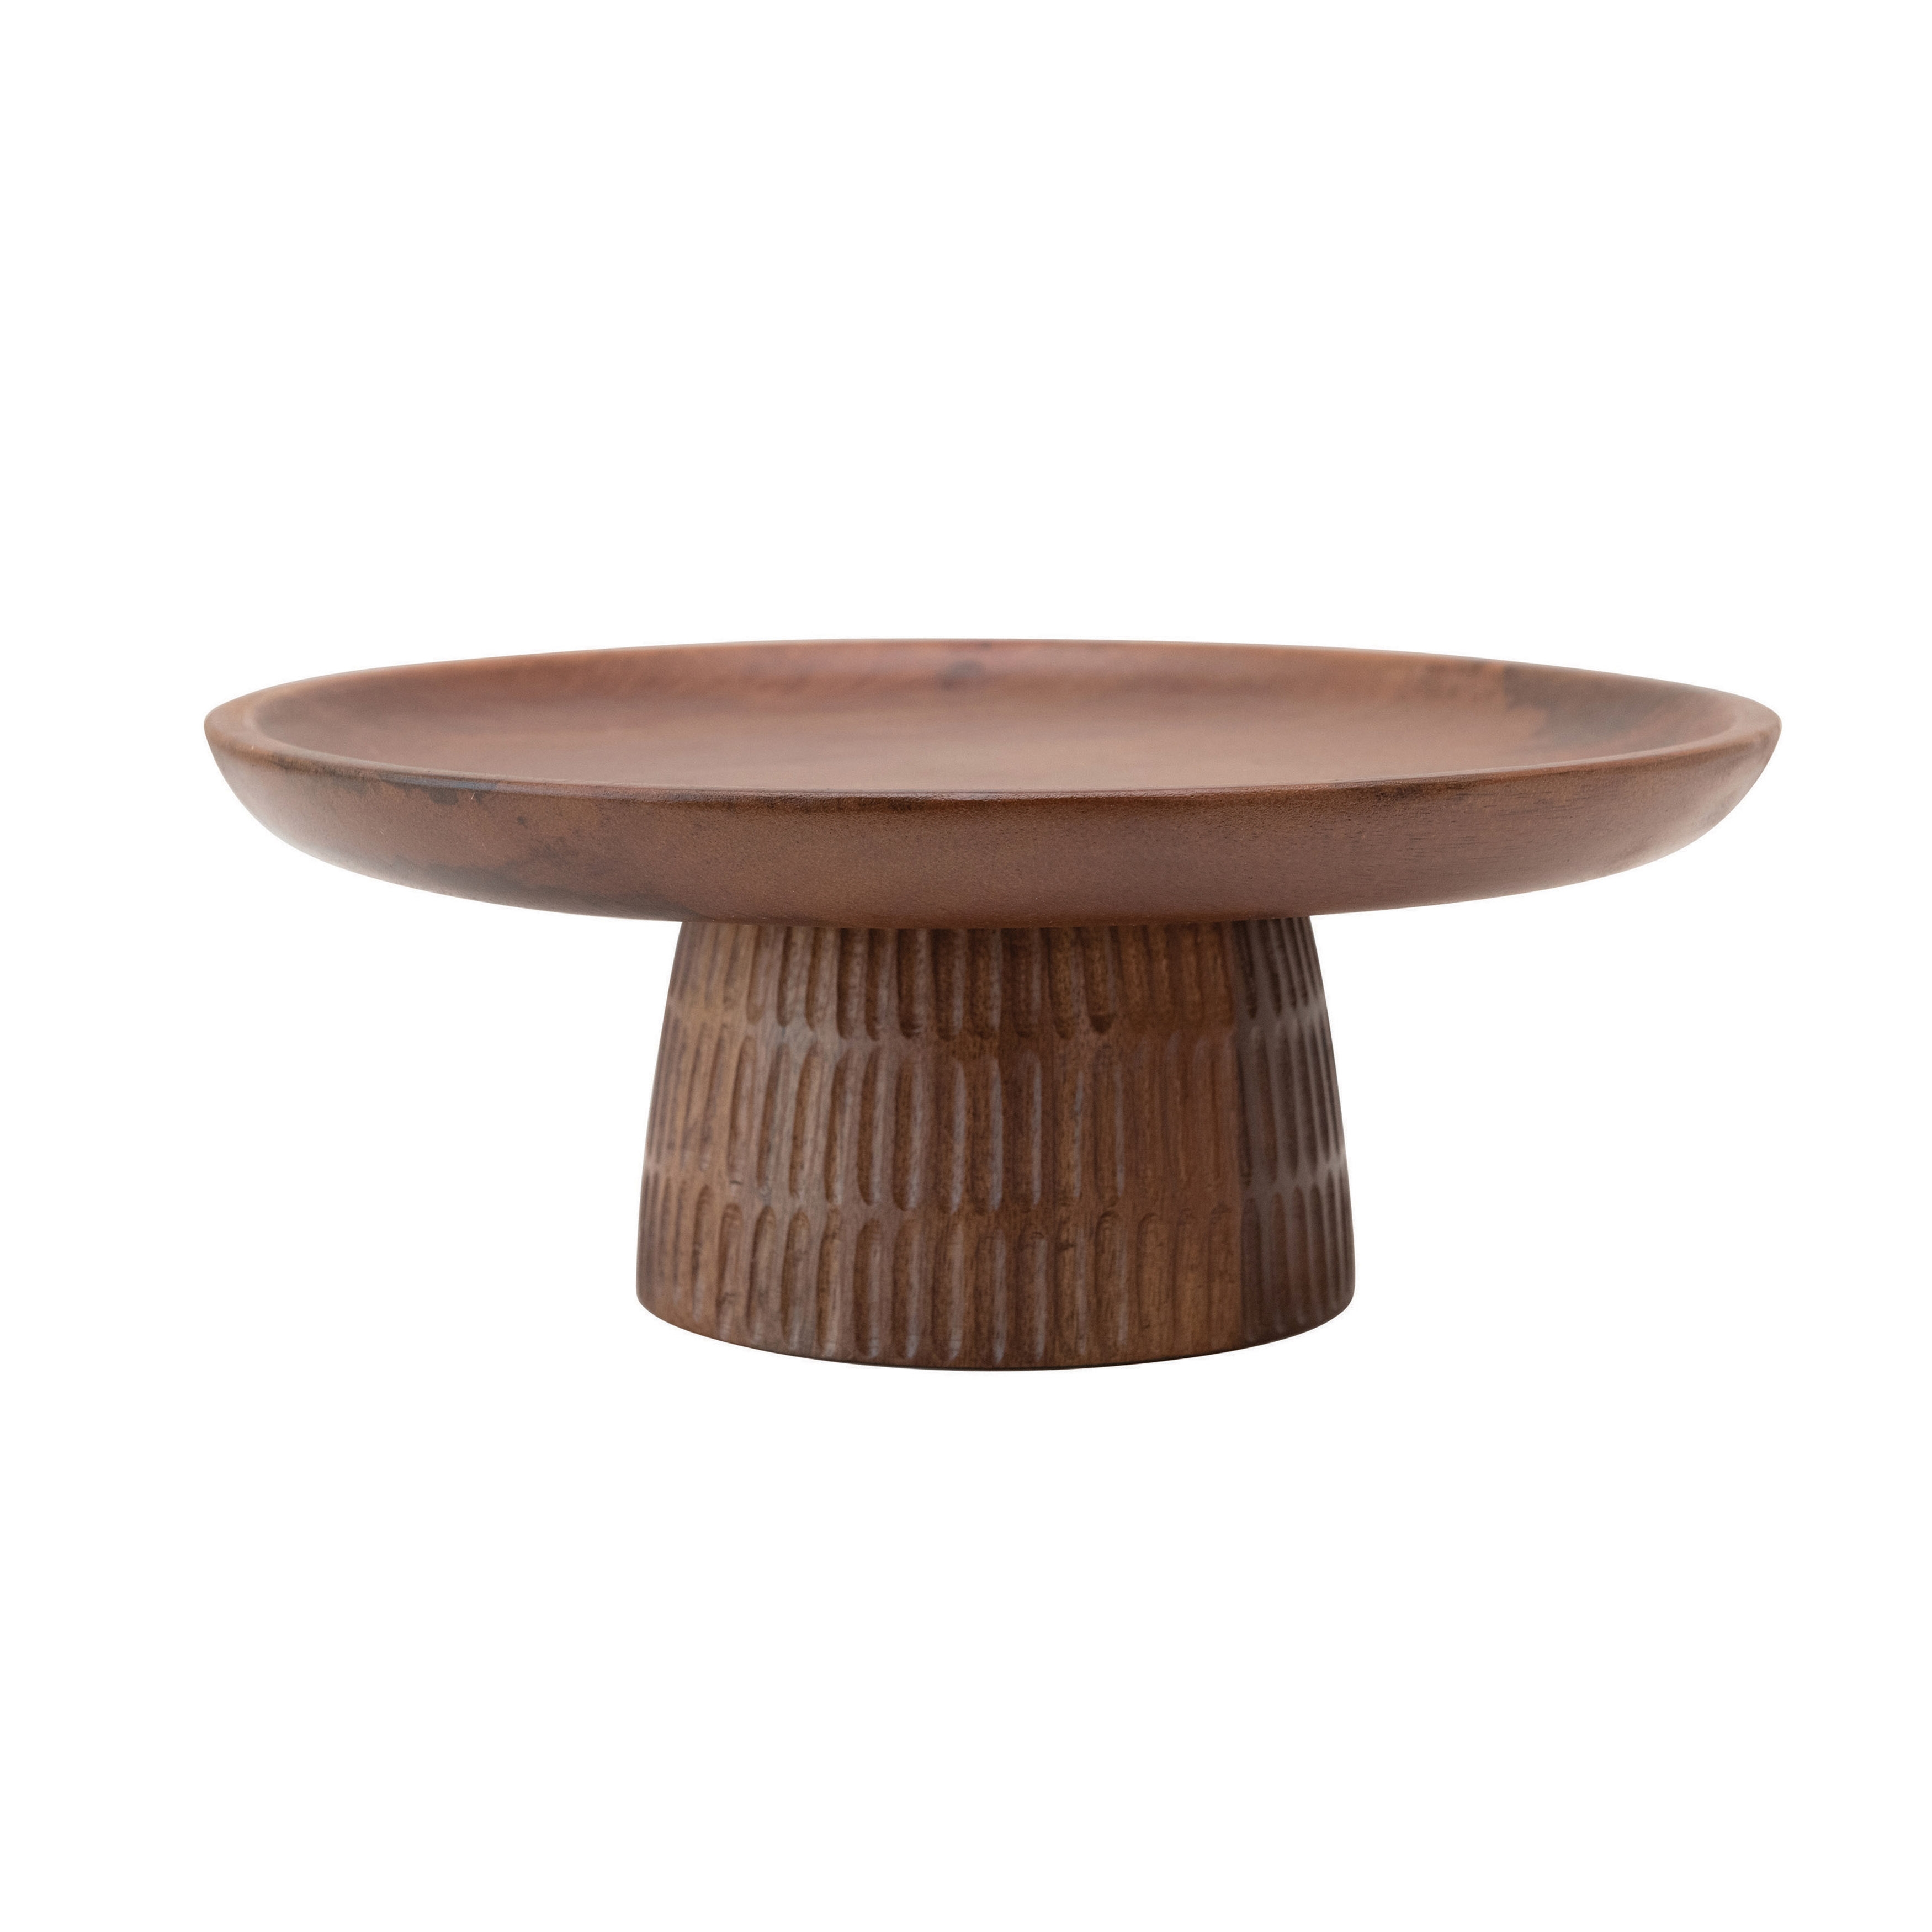 Hand-Carved Mango Wood Cake Stand, Walnut Finish (Each One Will Vary) - Image 0